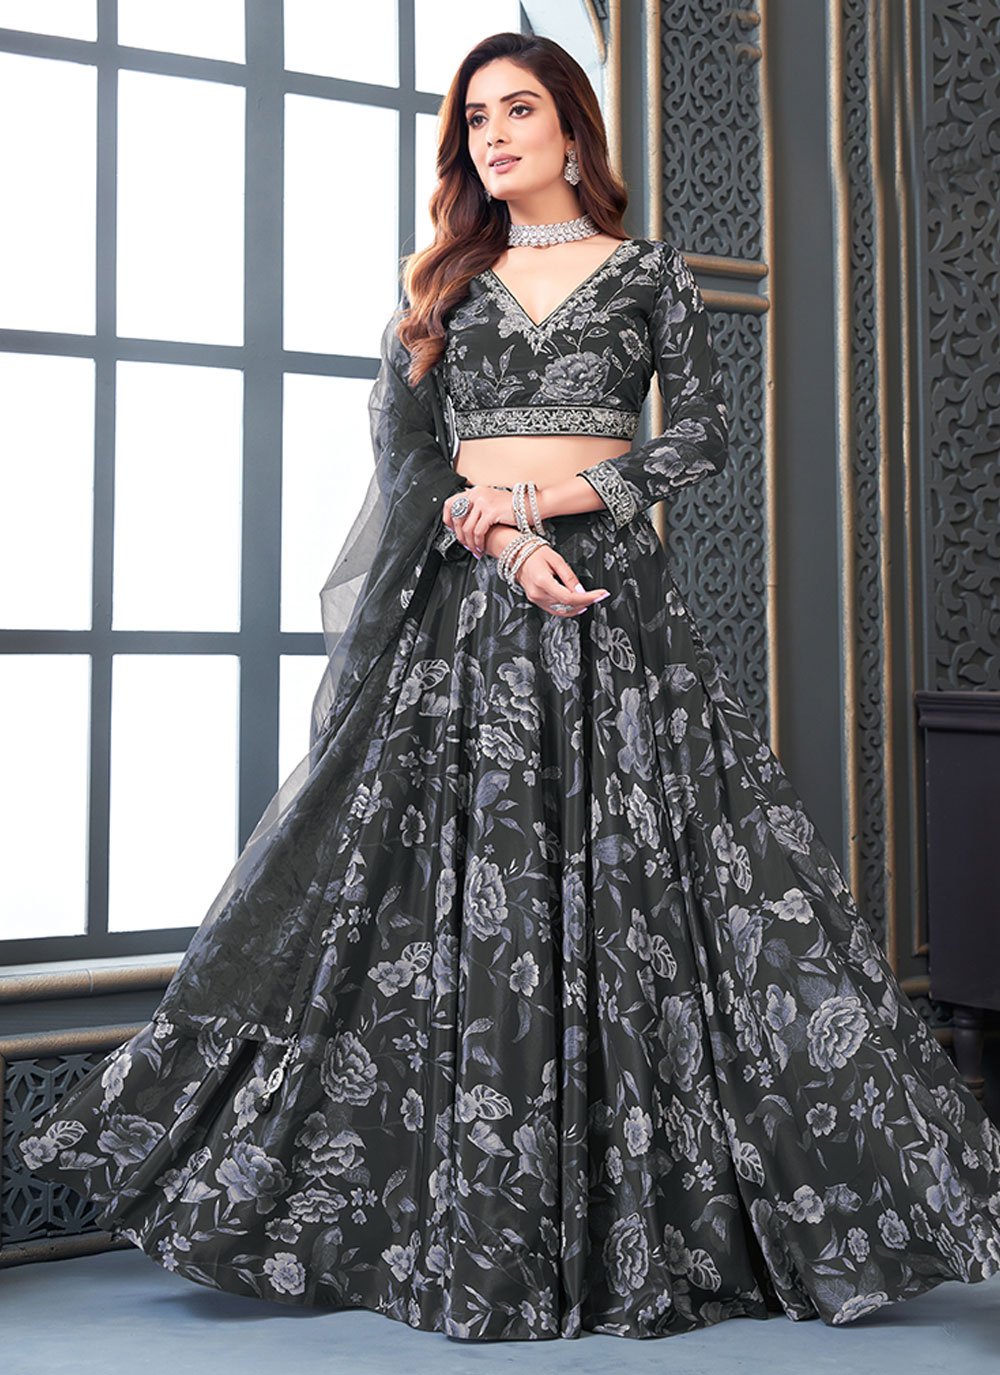 GOROLY Embroidered Semi Stitched Lehenga Choli - Buy GOROLY Embroidered  Semi Stitched Lehenga Choli Online at Best Prices in India | Flipkart.com